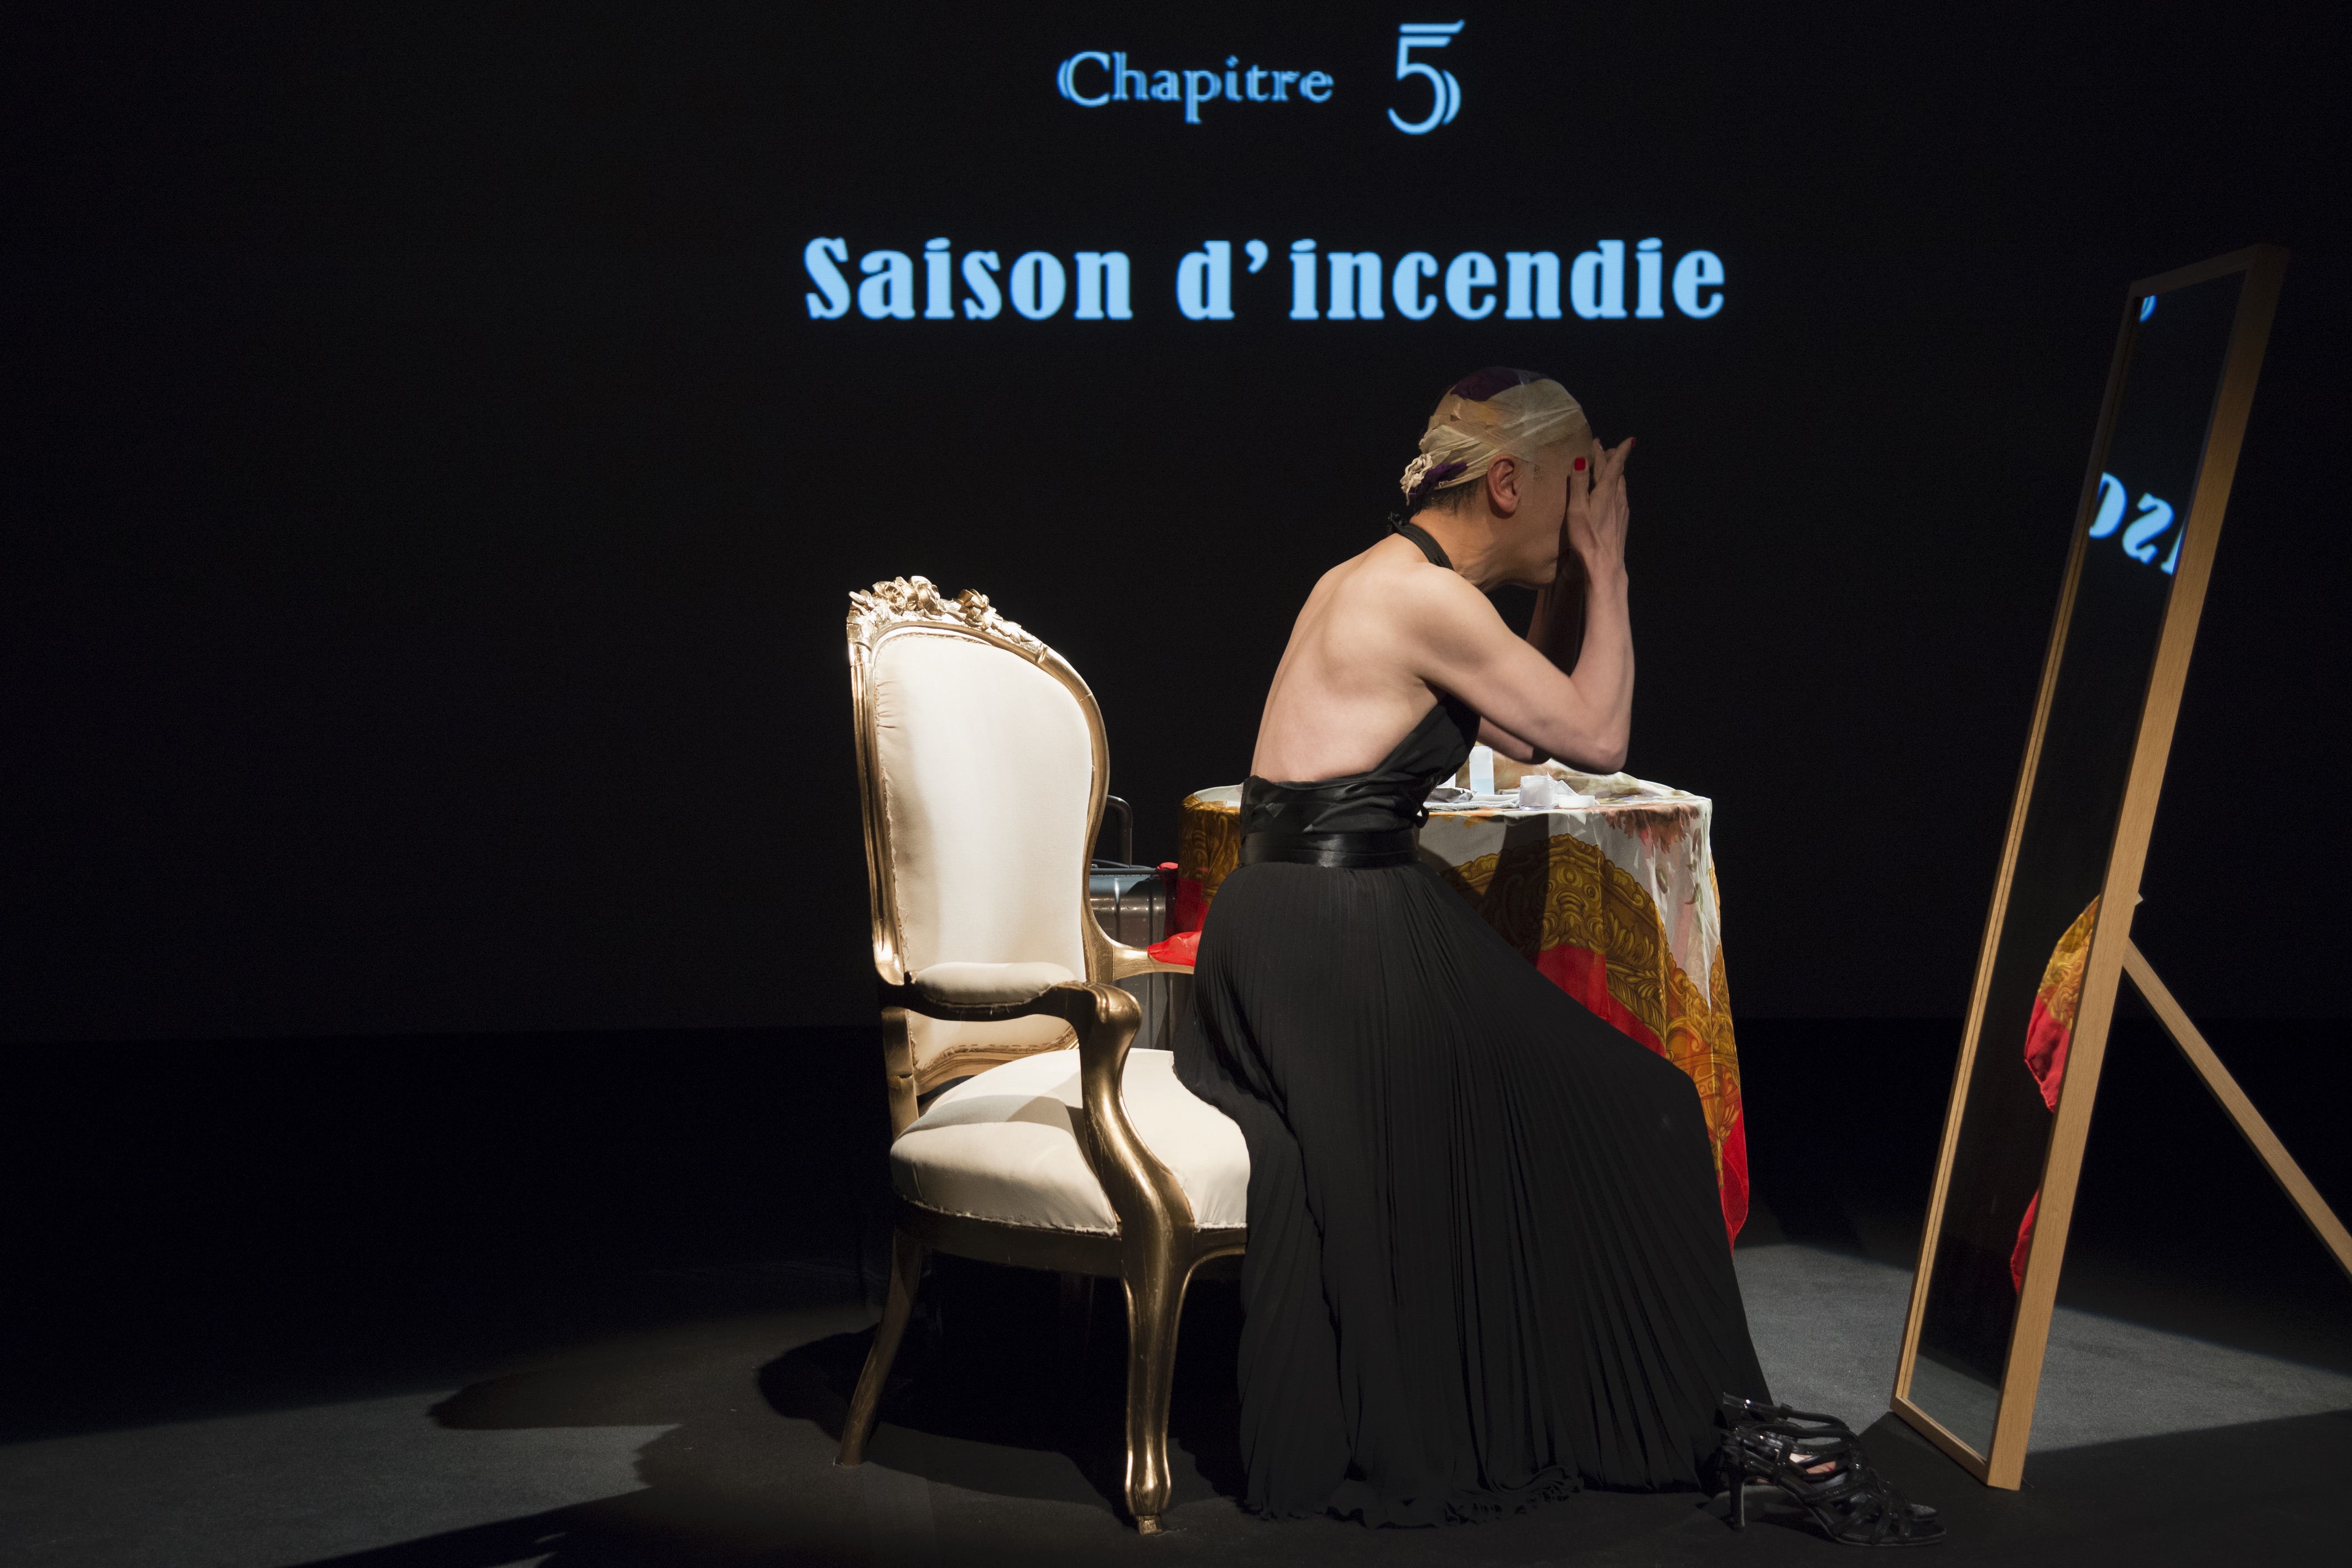 A muscular figure in a black floor-length halter dress sitting in an ornate armchair with their hands over their face and their head taped in a beige fabric. They are facing a floor-length mirror, with the words "Chapitre 5: Saison d'incendie" projected in blue behind them.